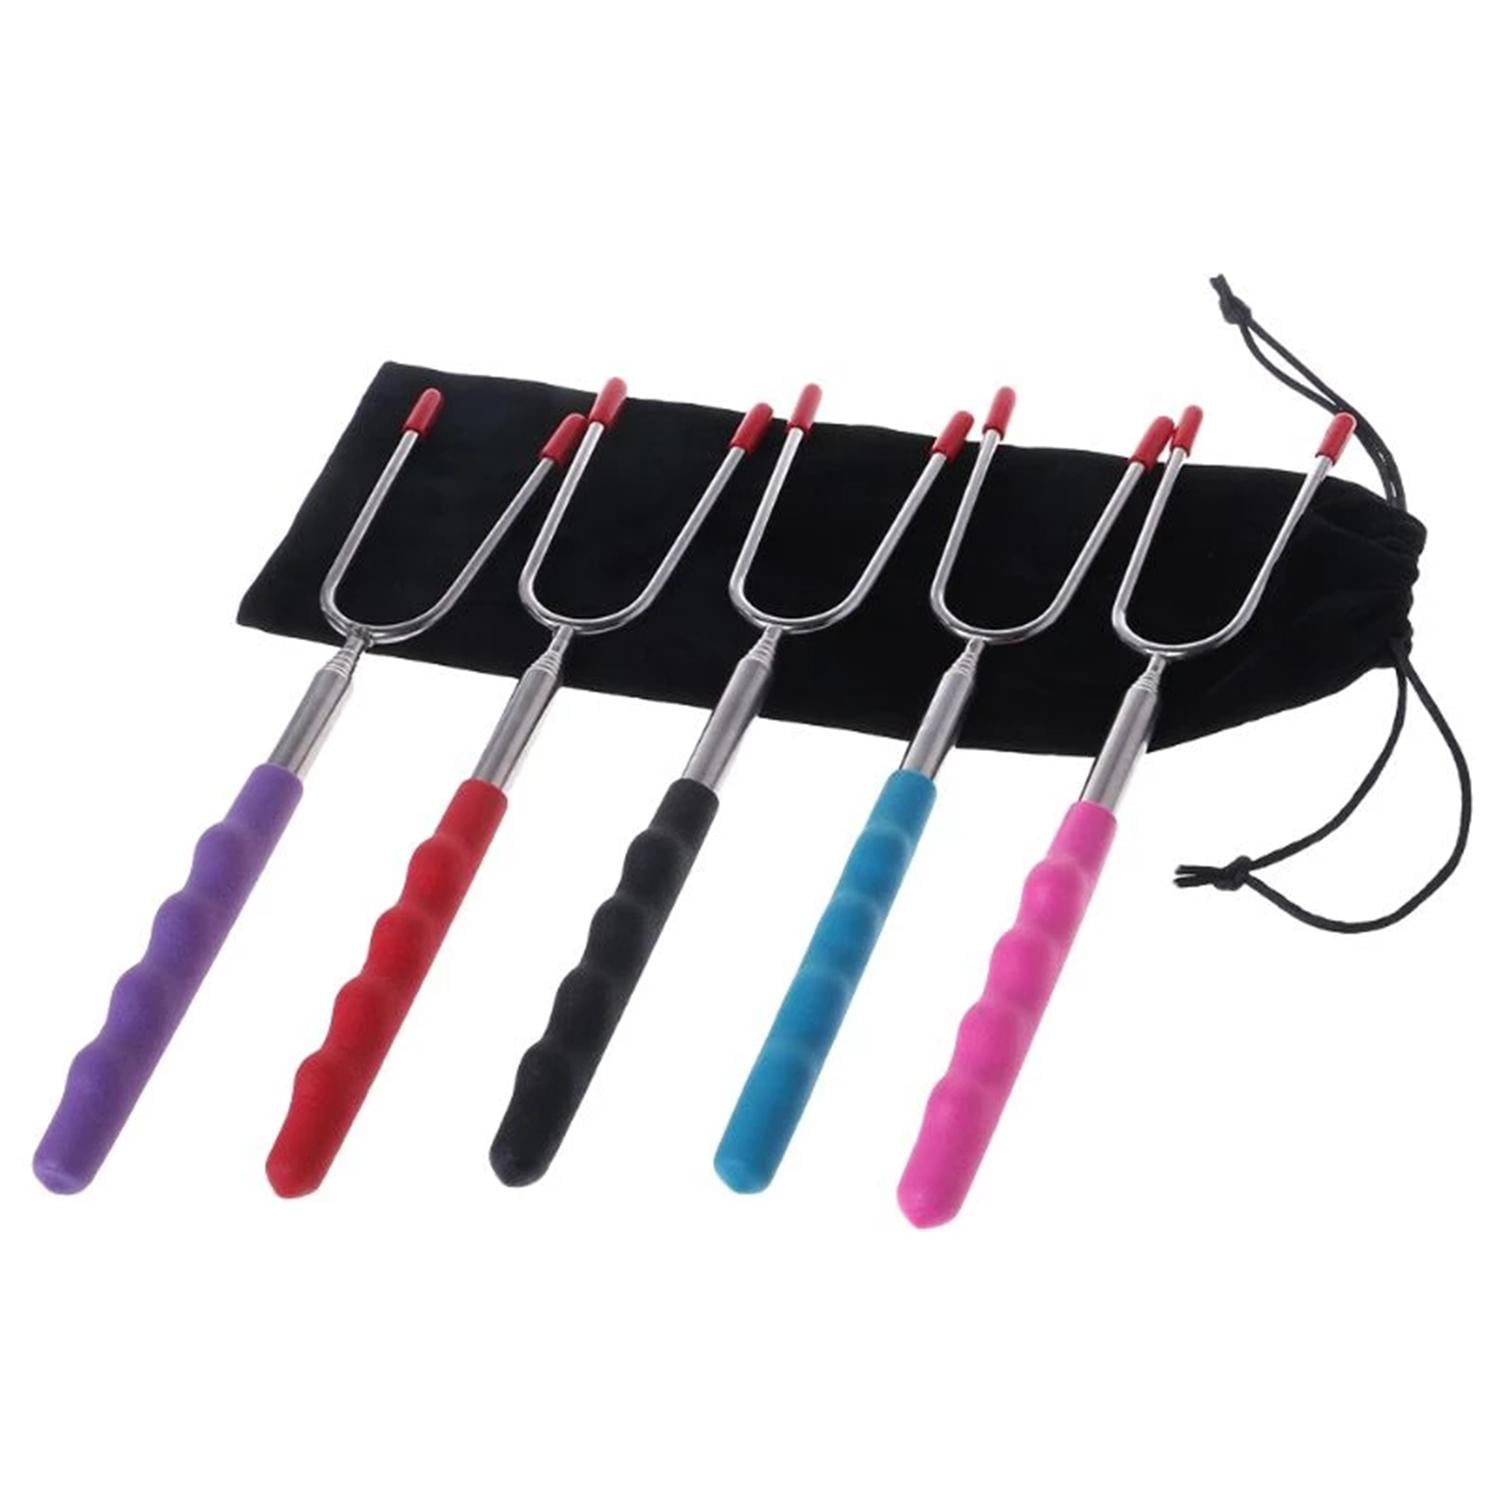 Fire Pit Campfire Nic BBQ Forks Marshmallow Roasting Sticks 7 Units 7 Colors !! Camping Chill and Hiking Accessories 